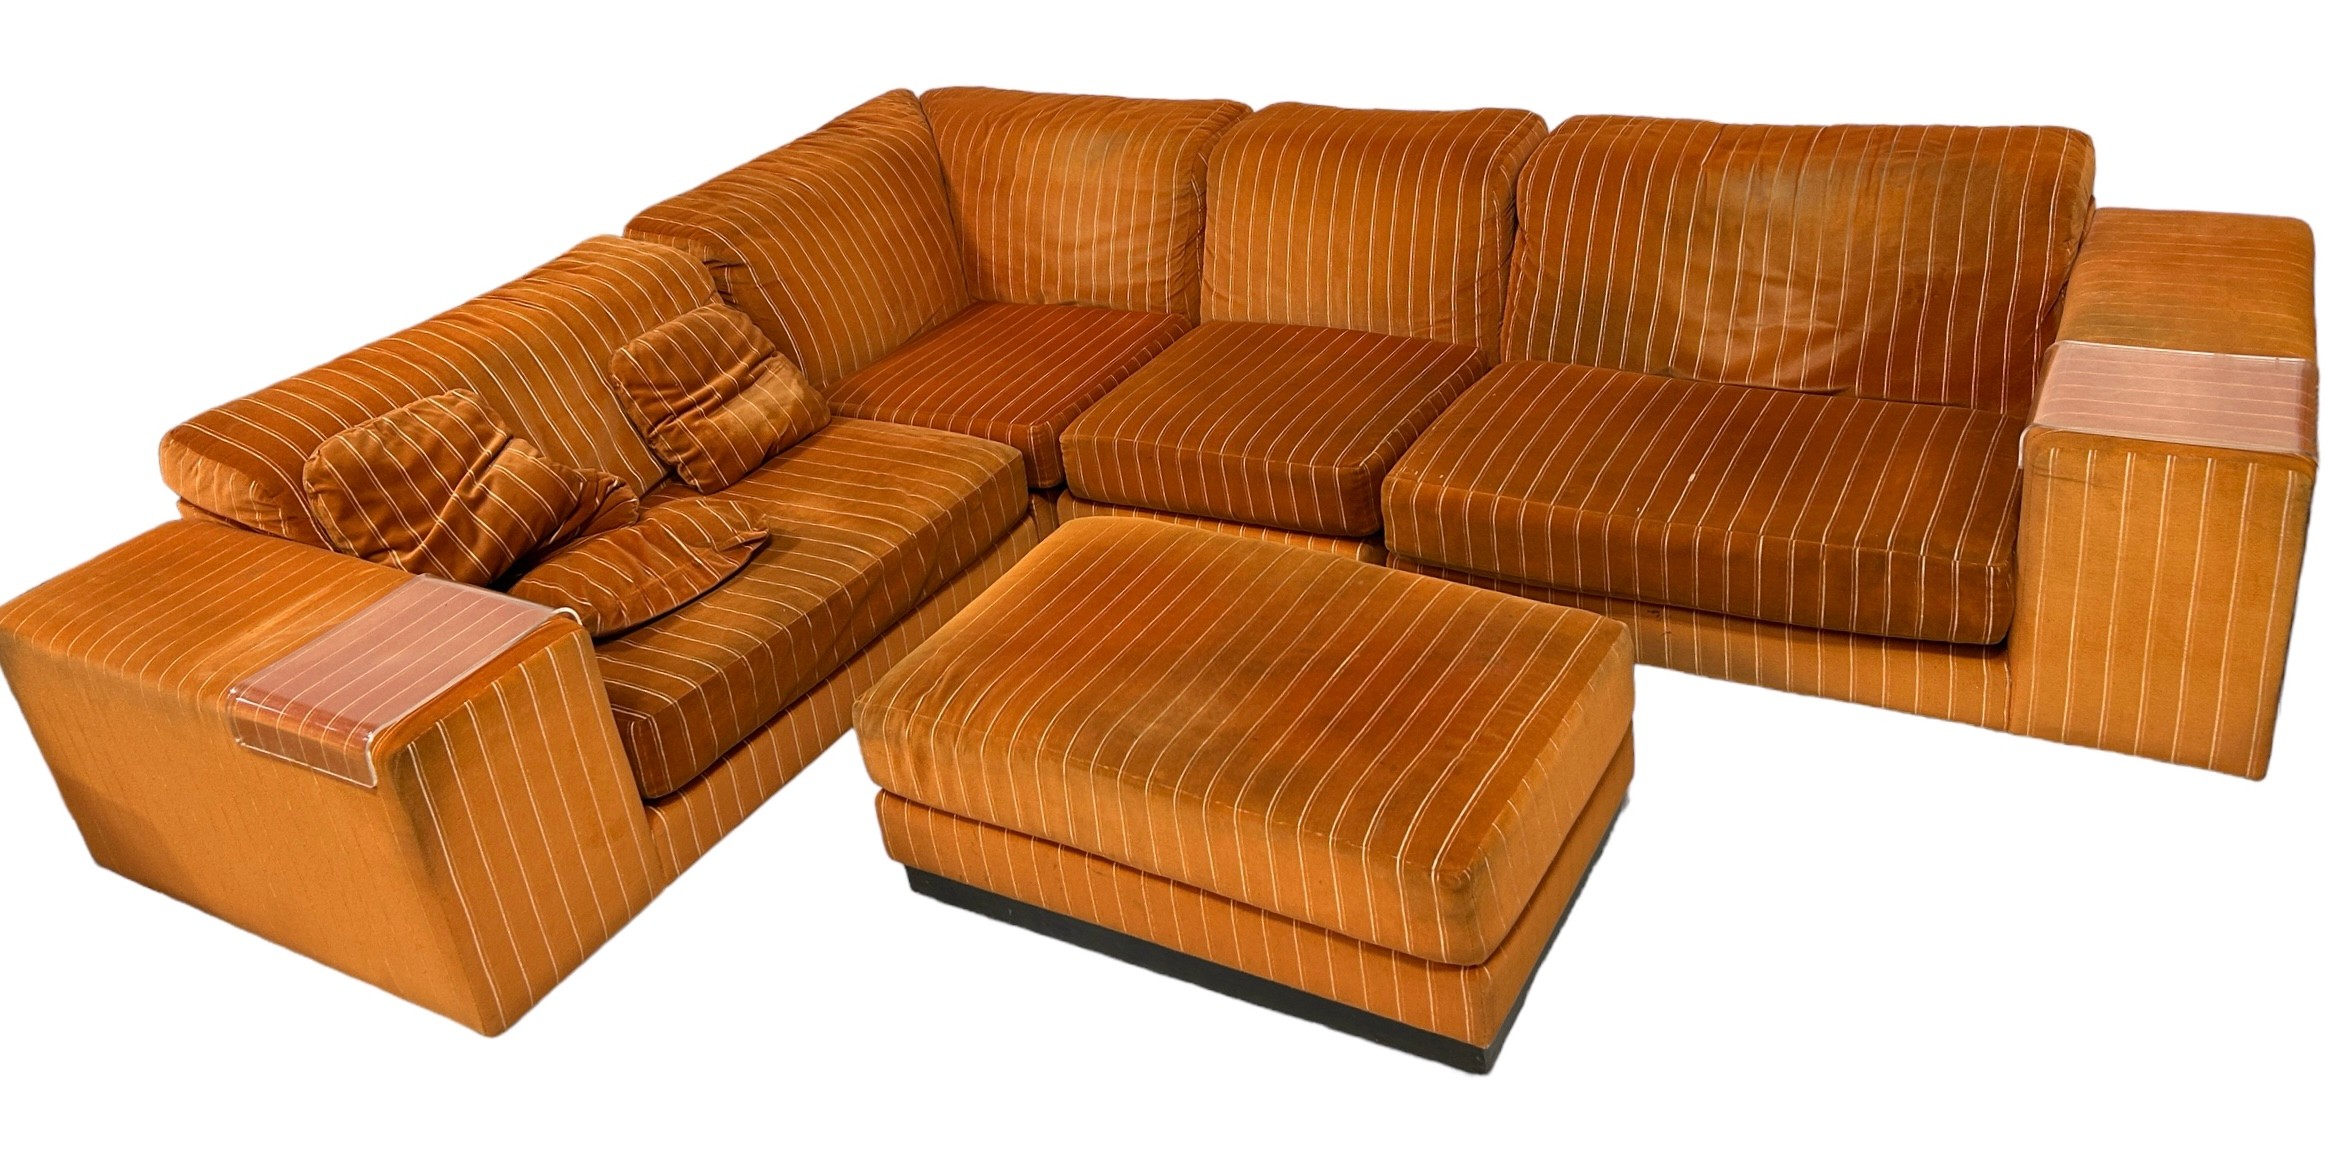 HOWARD KEITH: A LARGE SECTIONAL CORNER SOFA UPHOLSTERED IN STRIPED BURNT ORANGE FABRIC, 300cm x